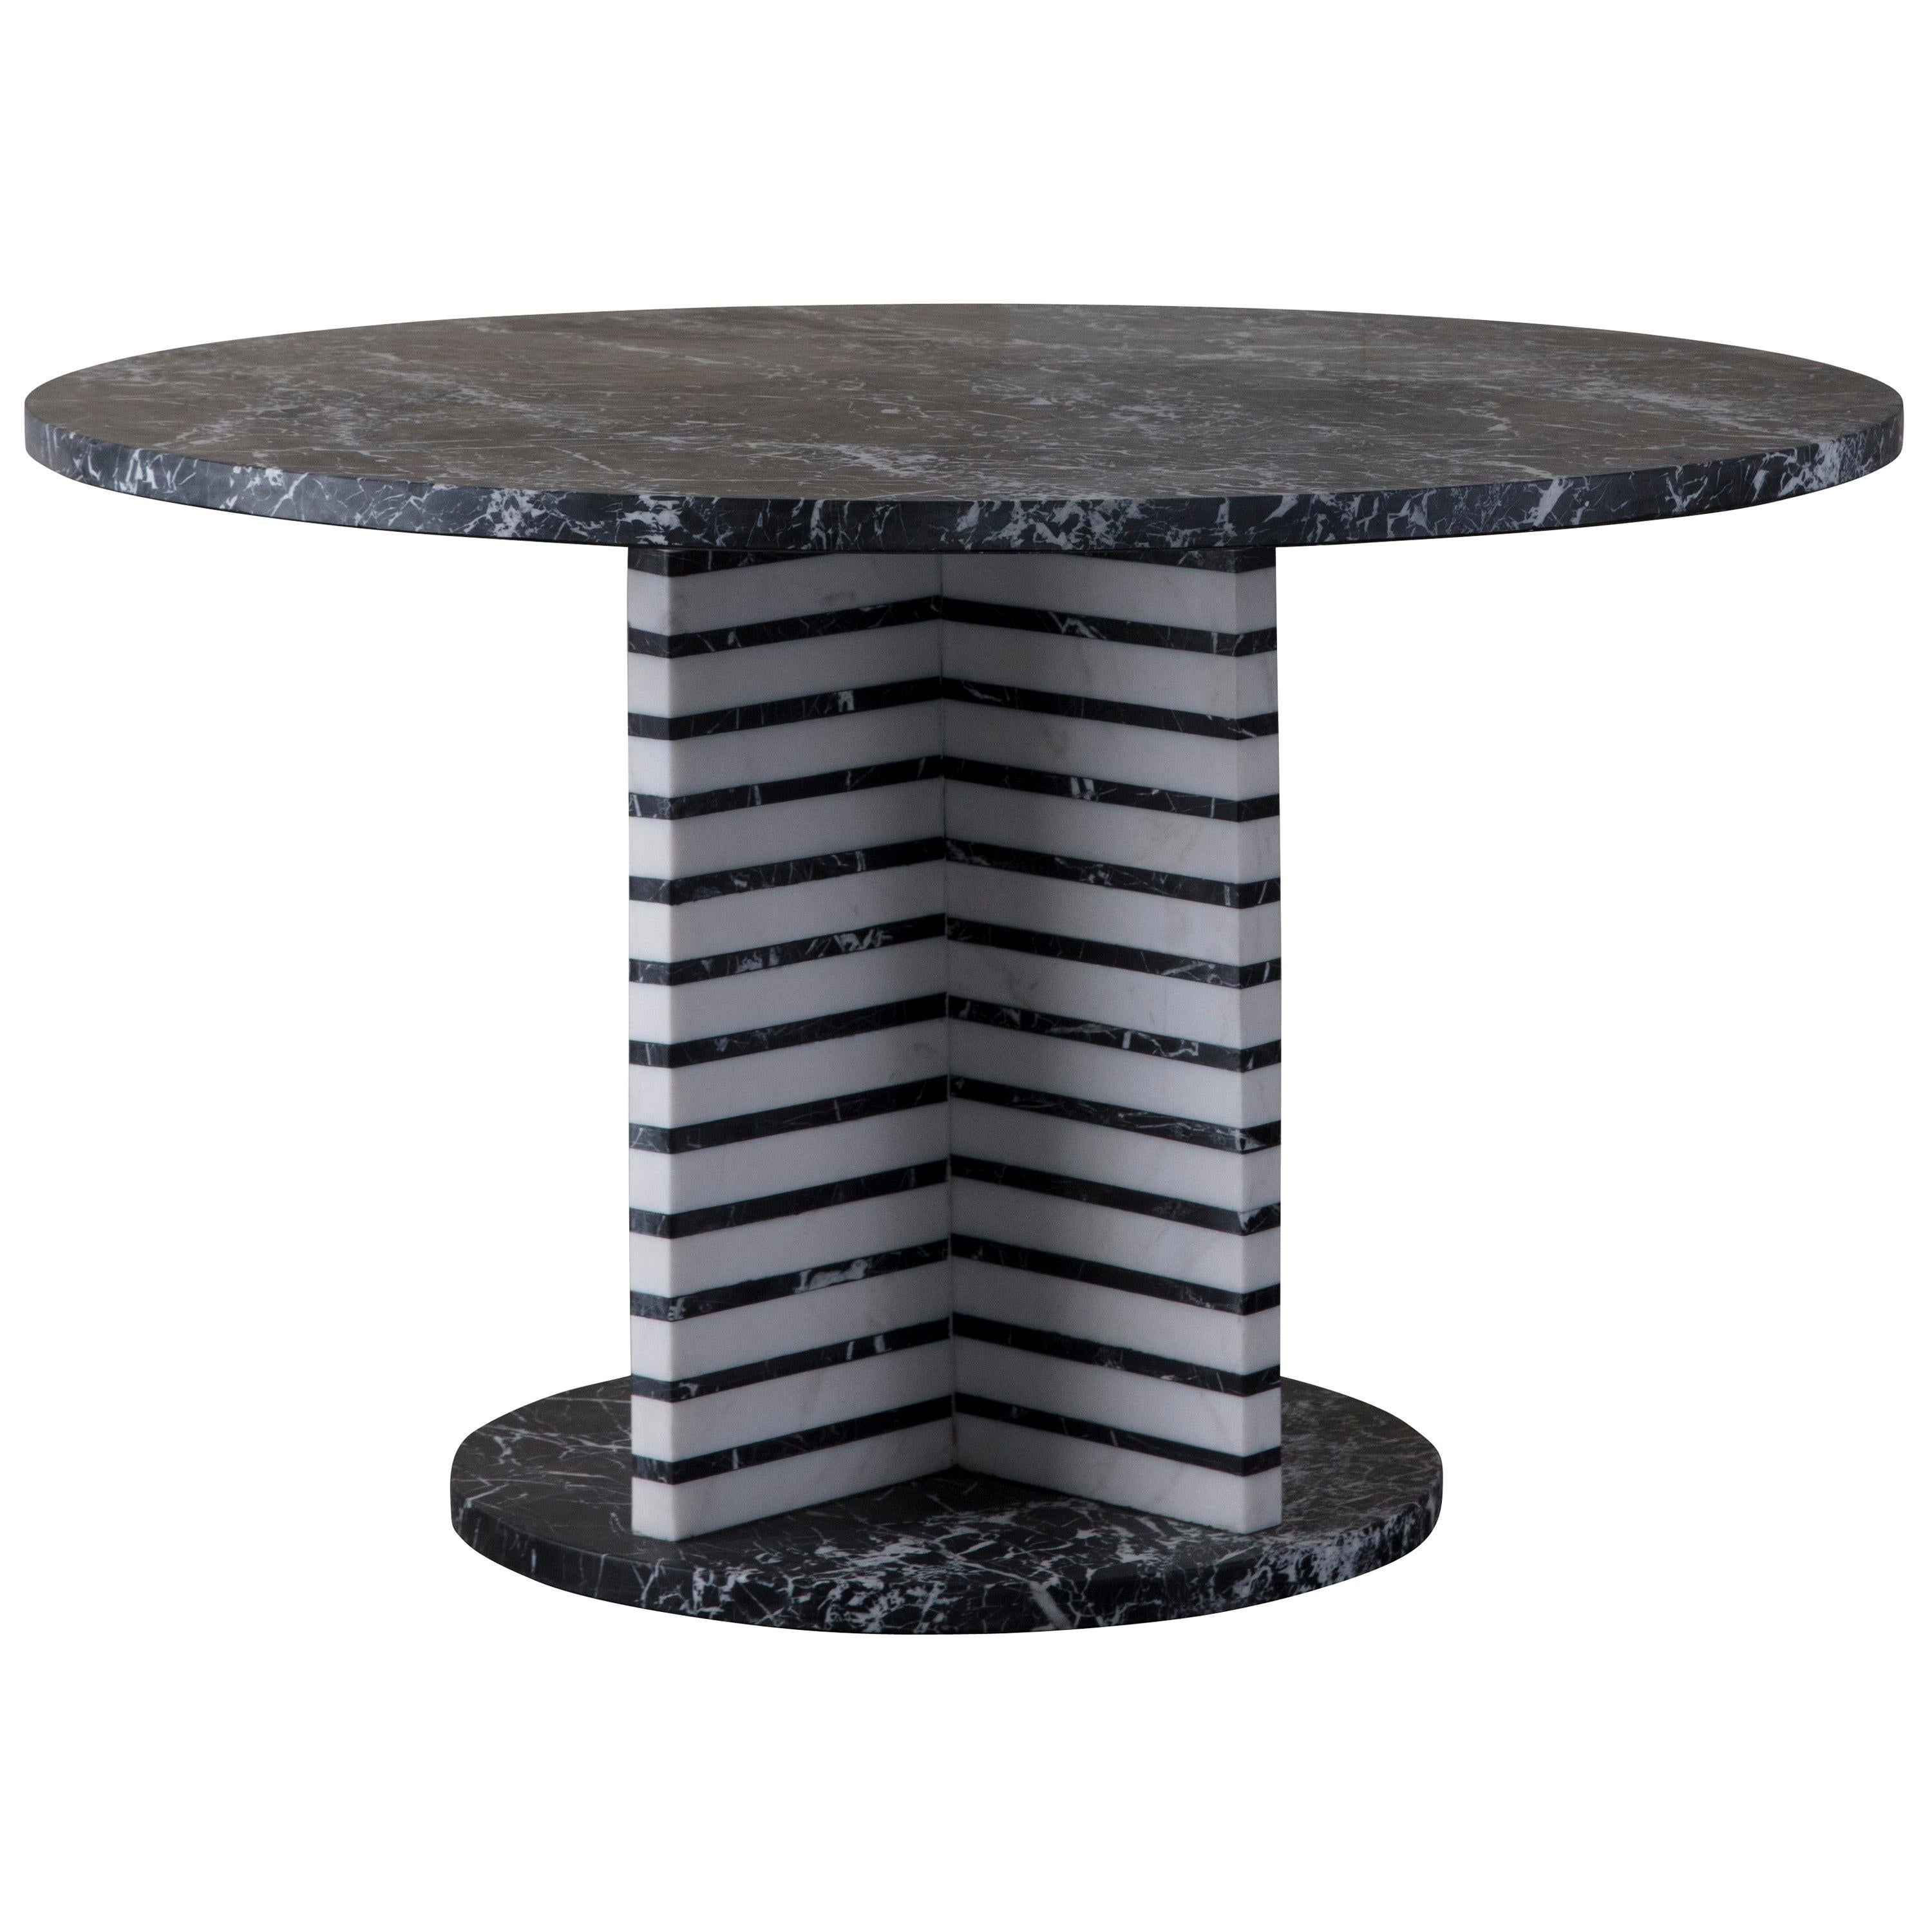 Lineage Black and White Marble Dining Table by Kelly Wearstler